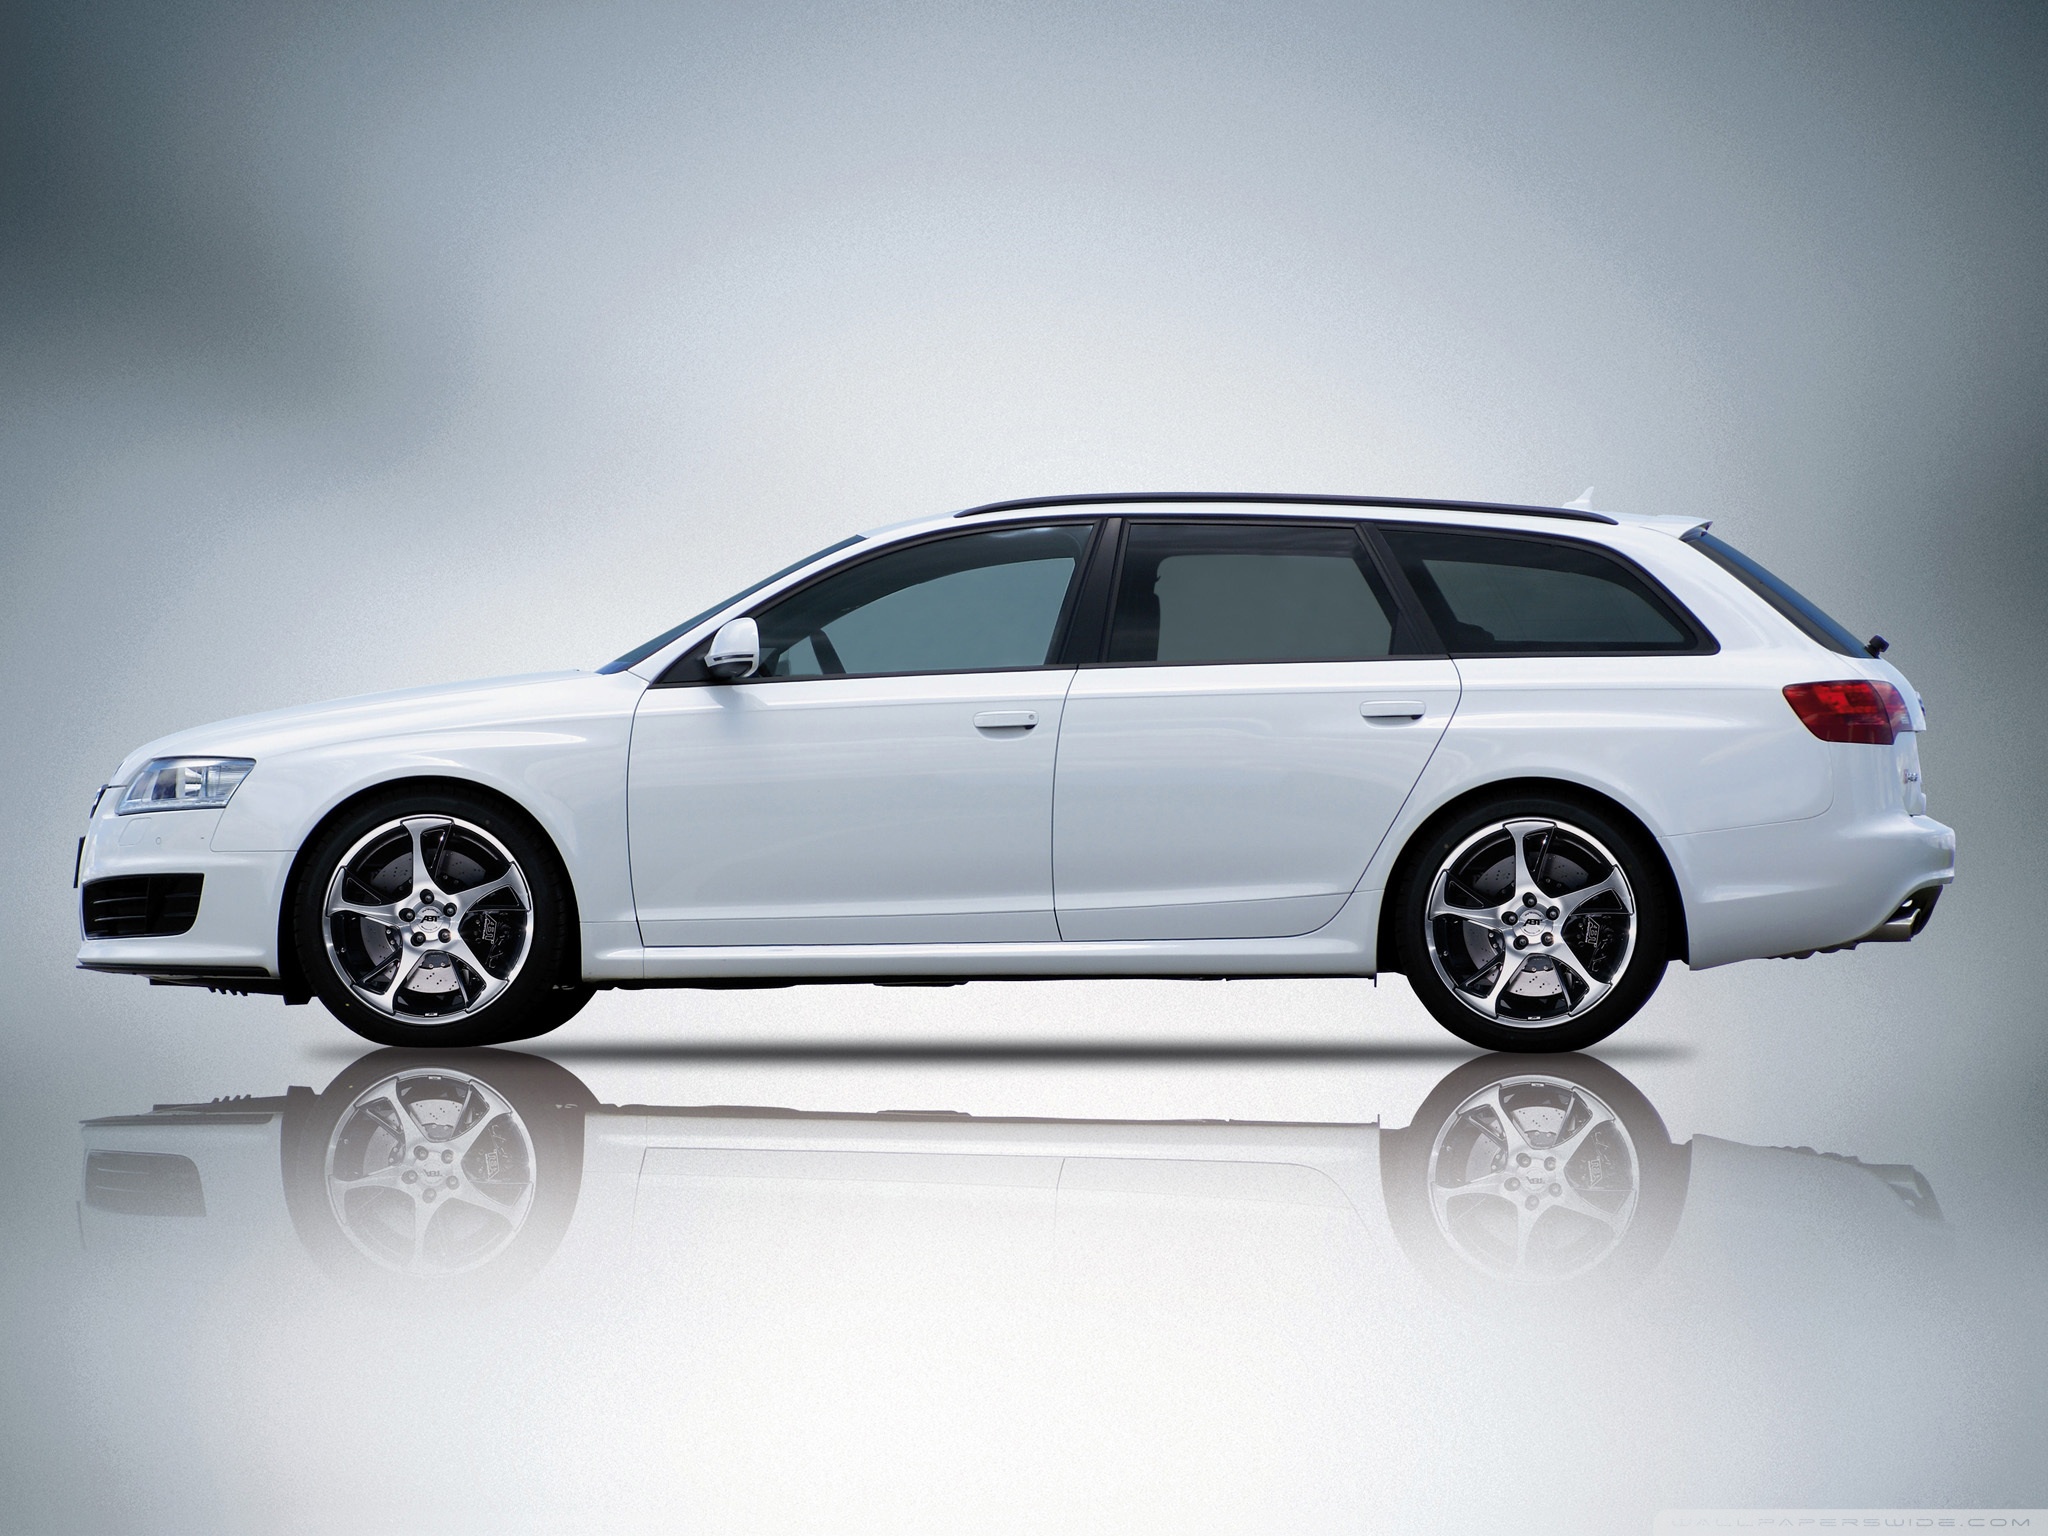 Related Wallpapers - Audi Rs6 Abt , HD Wallpaper & Backgrounds